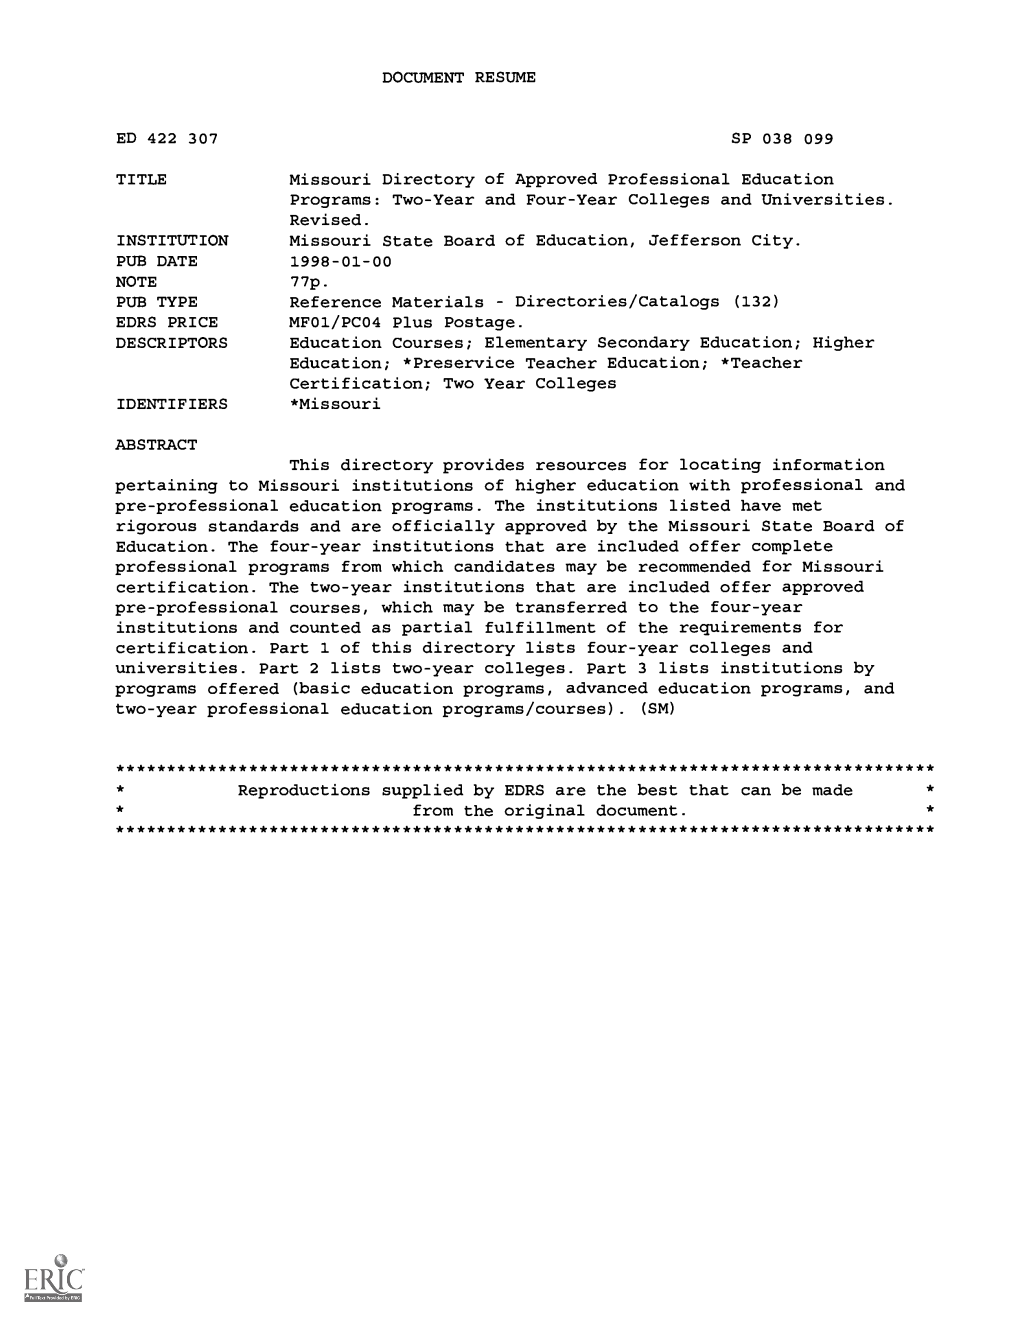 DOCUMENT RESUME Missouri Directory of Approved Professional